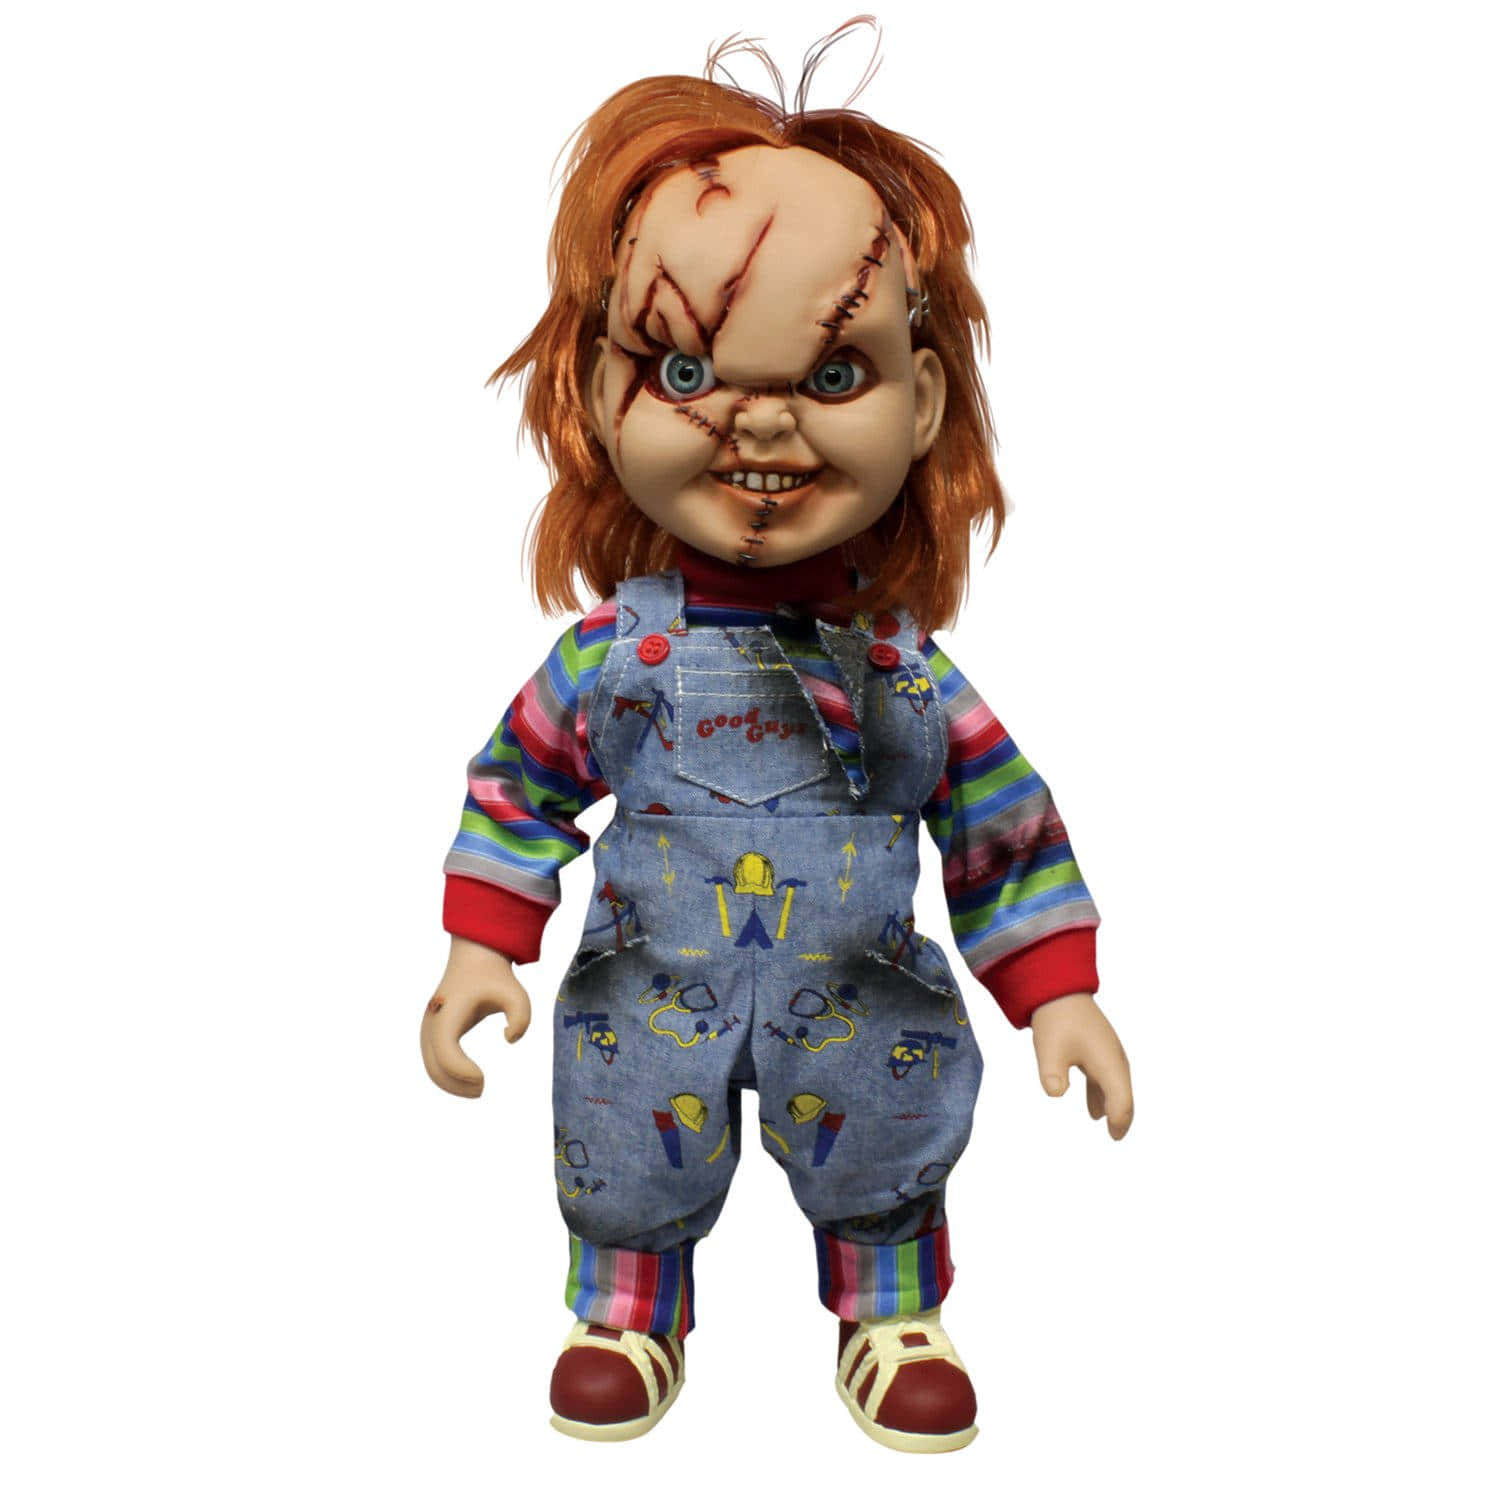 Wounded Chucky Doll Wallpaper